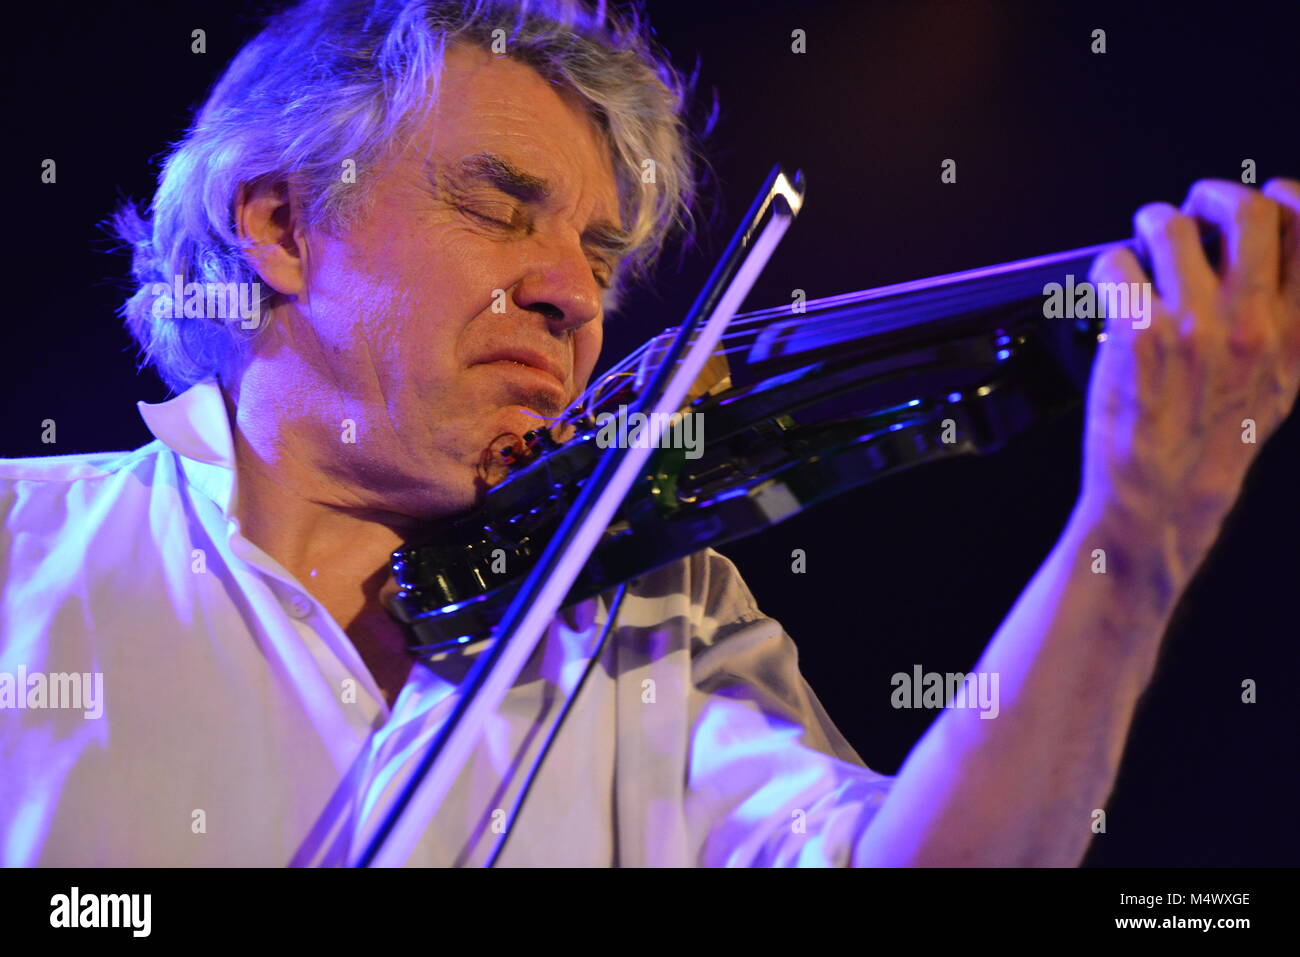 FILE: 18th Feb, 2018. Photo taken: Paris, France. 19th March 2014. Photo shows Didier performing in concert "Le Petit Journal Montparnasse in 2014". Didier Lockwood, 62, one of the most famous French jazz violinists, died of a heart attack this Sunday 18th February, announced his agent. He collaborated with the greatest, from Claude Nougaro to Barbara through Jacques Higelin or Miles Davis. Credit: Gilles Delacourd/Alamy Live News Stock Photo